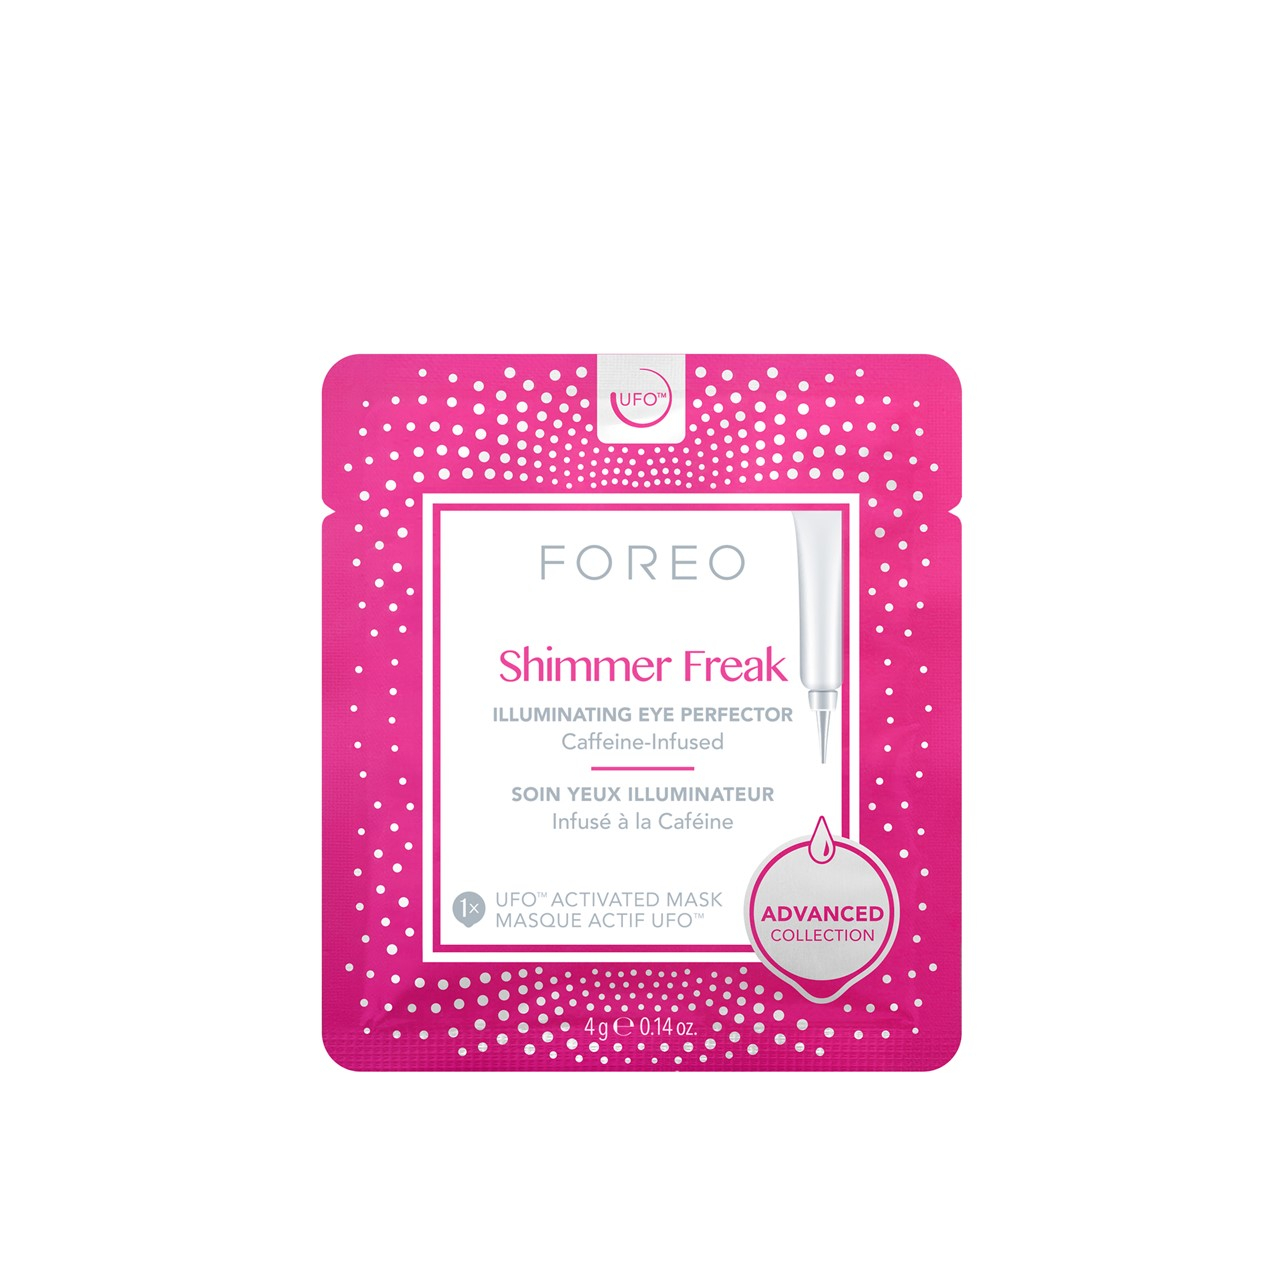 FOREO UFO™ Activated Facial Mask Shimmer Freak 6x4g